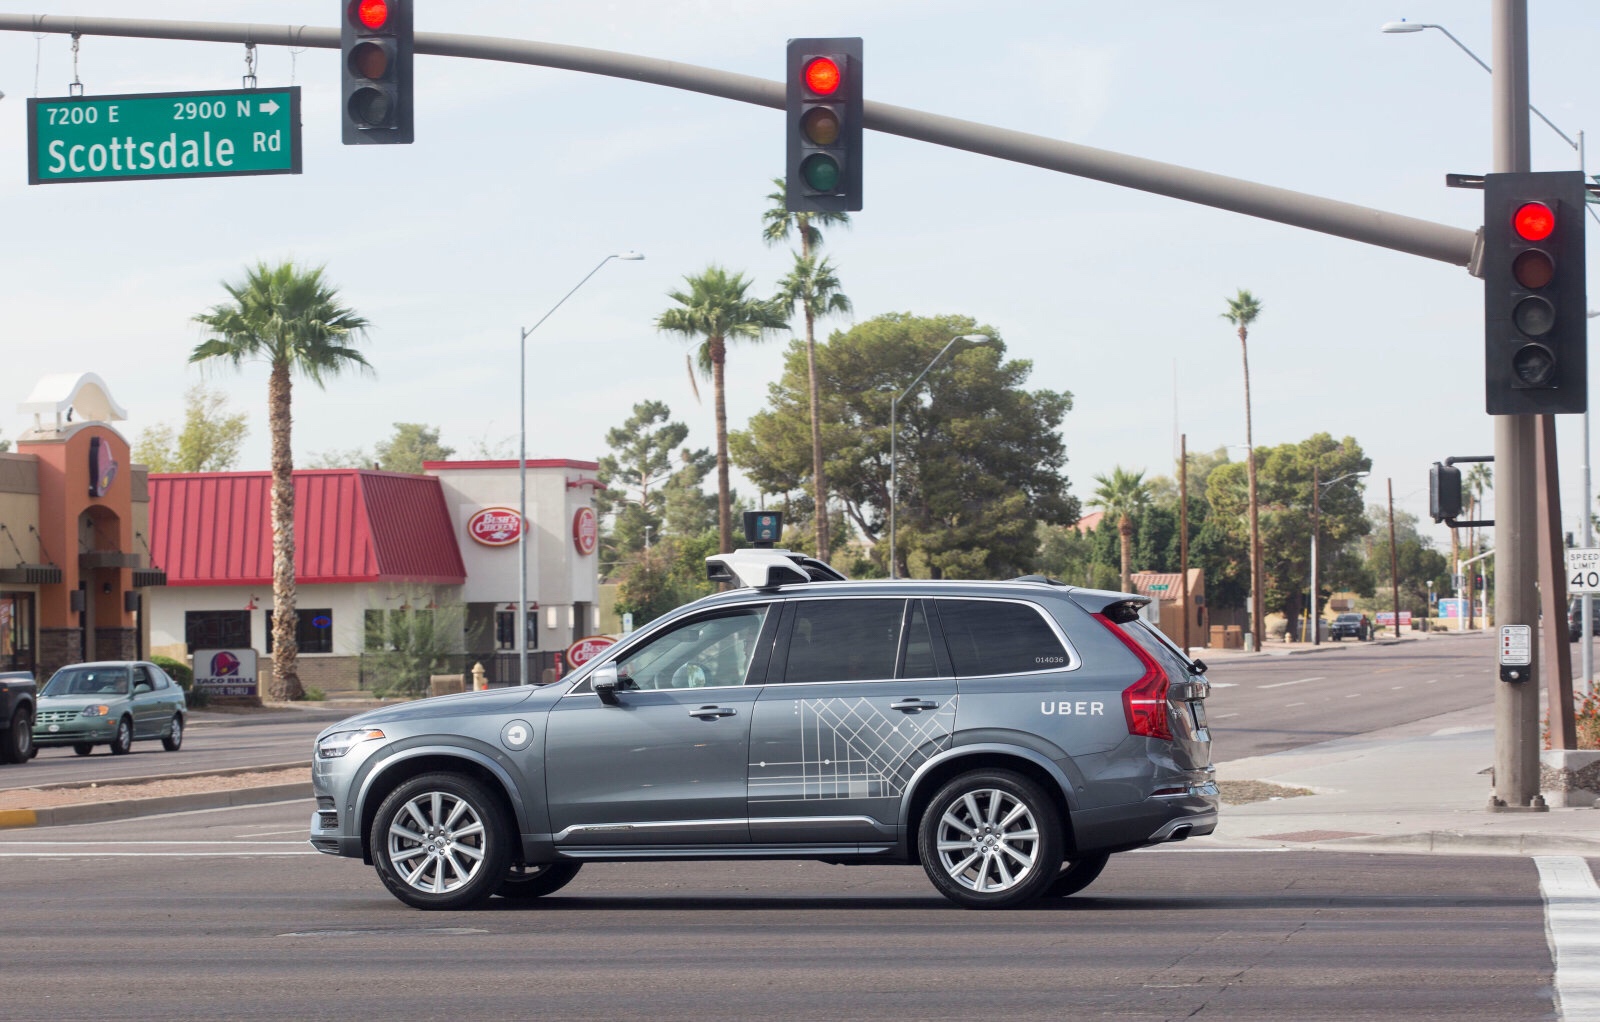 Uber has settled with family of pedestrian that was hit by its self-driving SUV